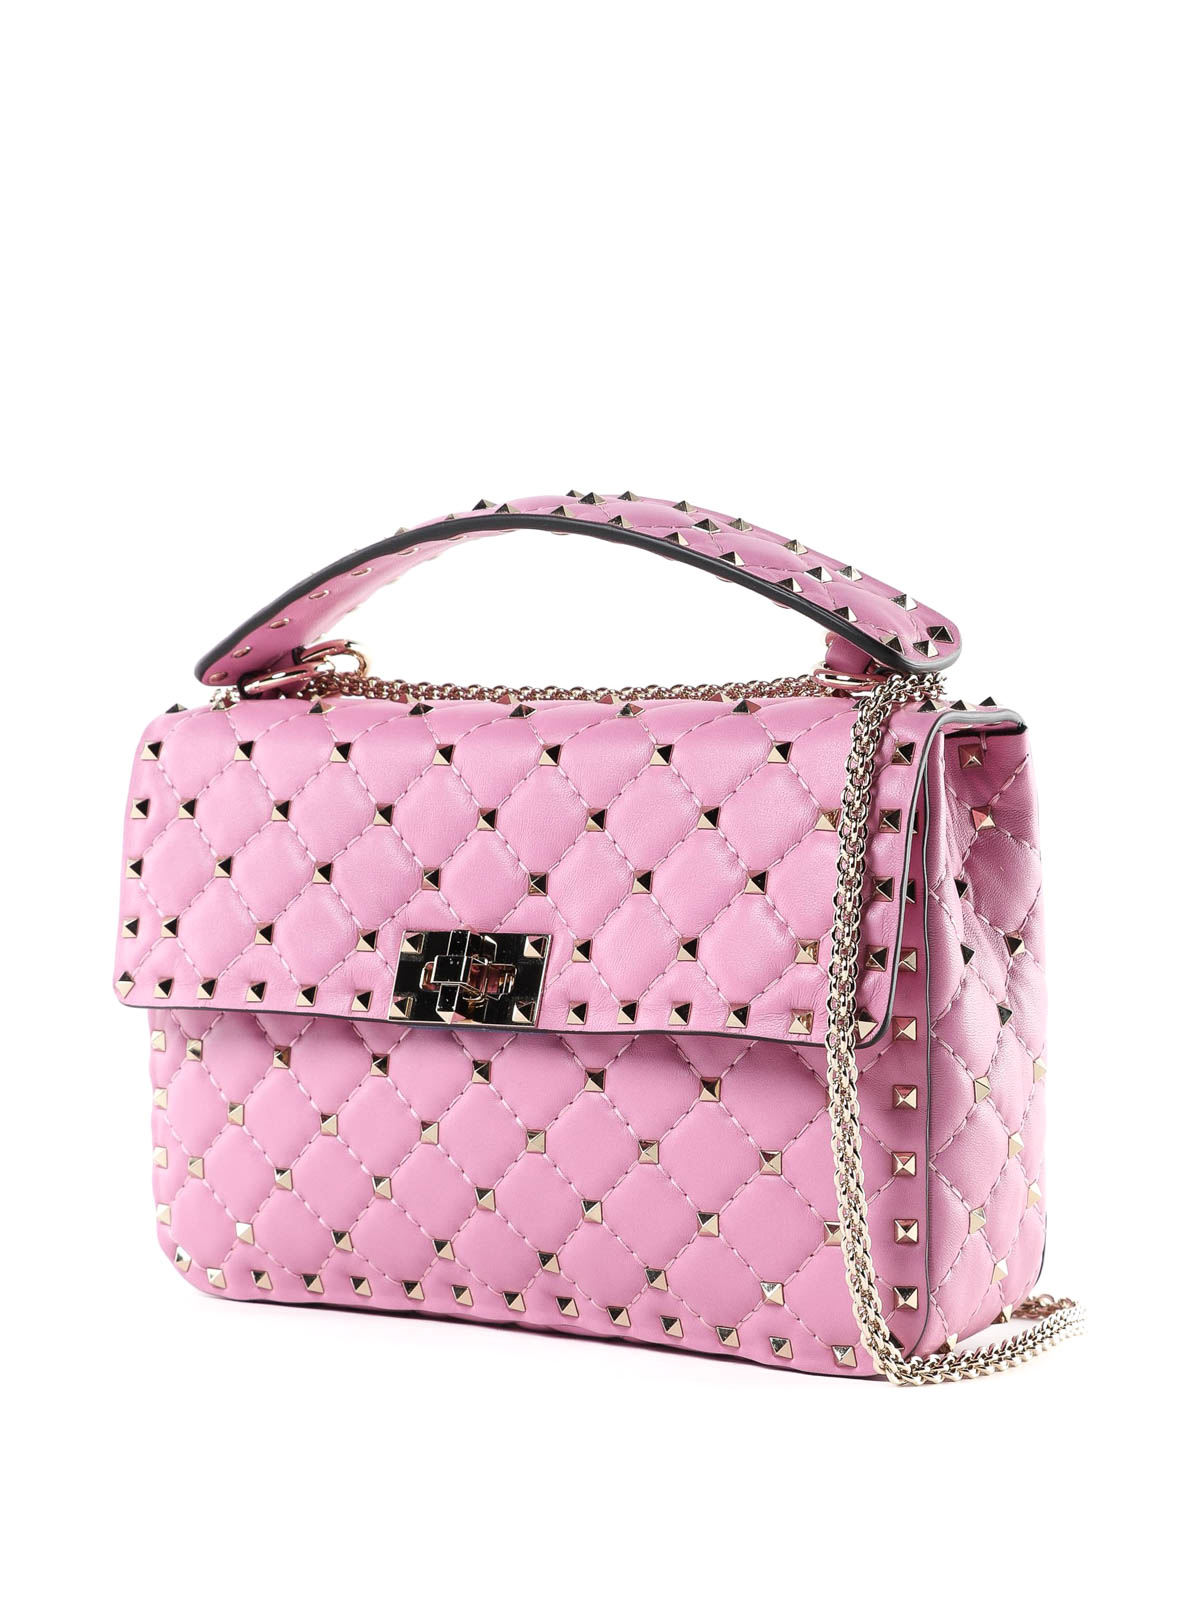 Small Nappa Rockstud Spike Bag for Woman in Pink Pp